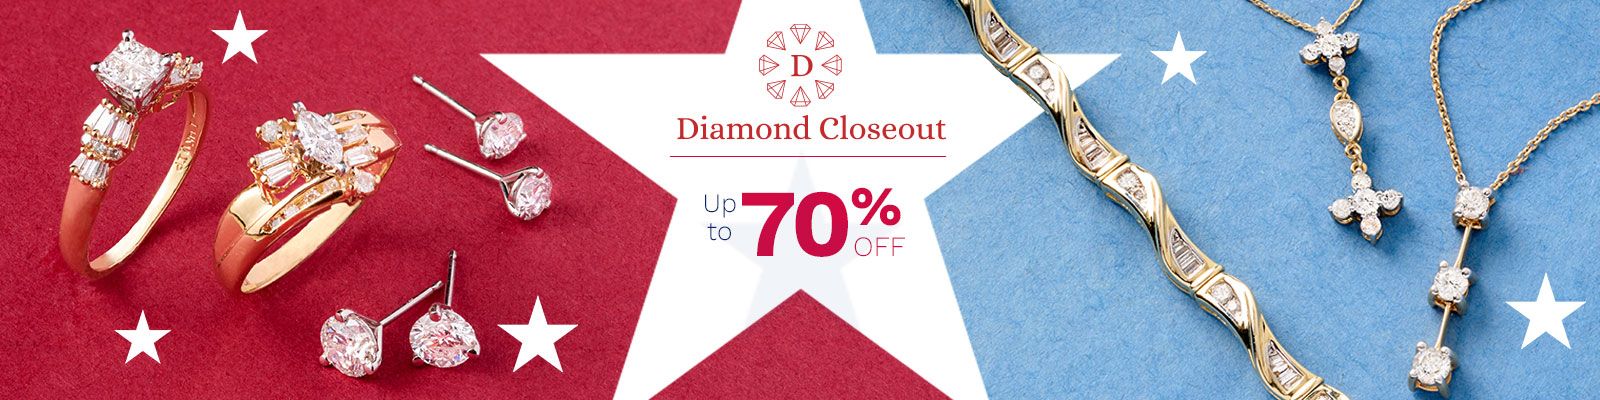 Diamond Closeout | Up to 70% Off ft. 211-880, 211-728, 211-730, 210-753, 212-539, 211-342, 210-241, 211-381, 210-764